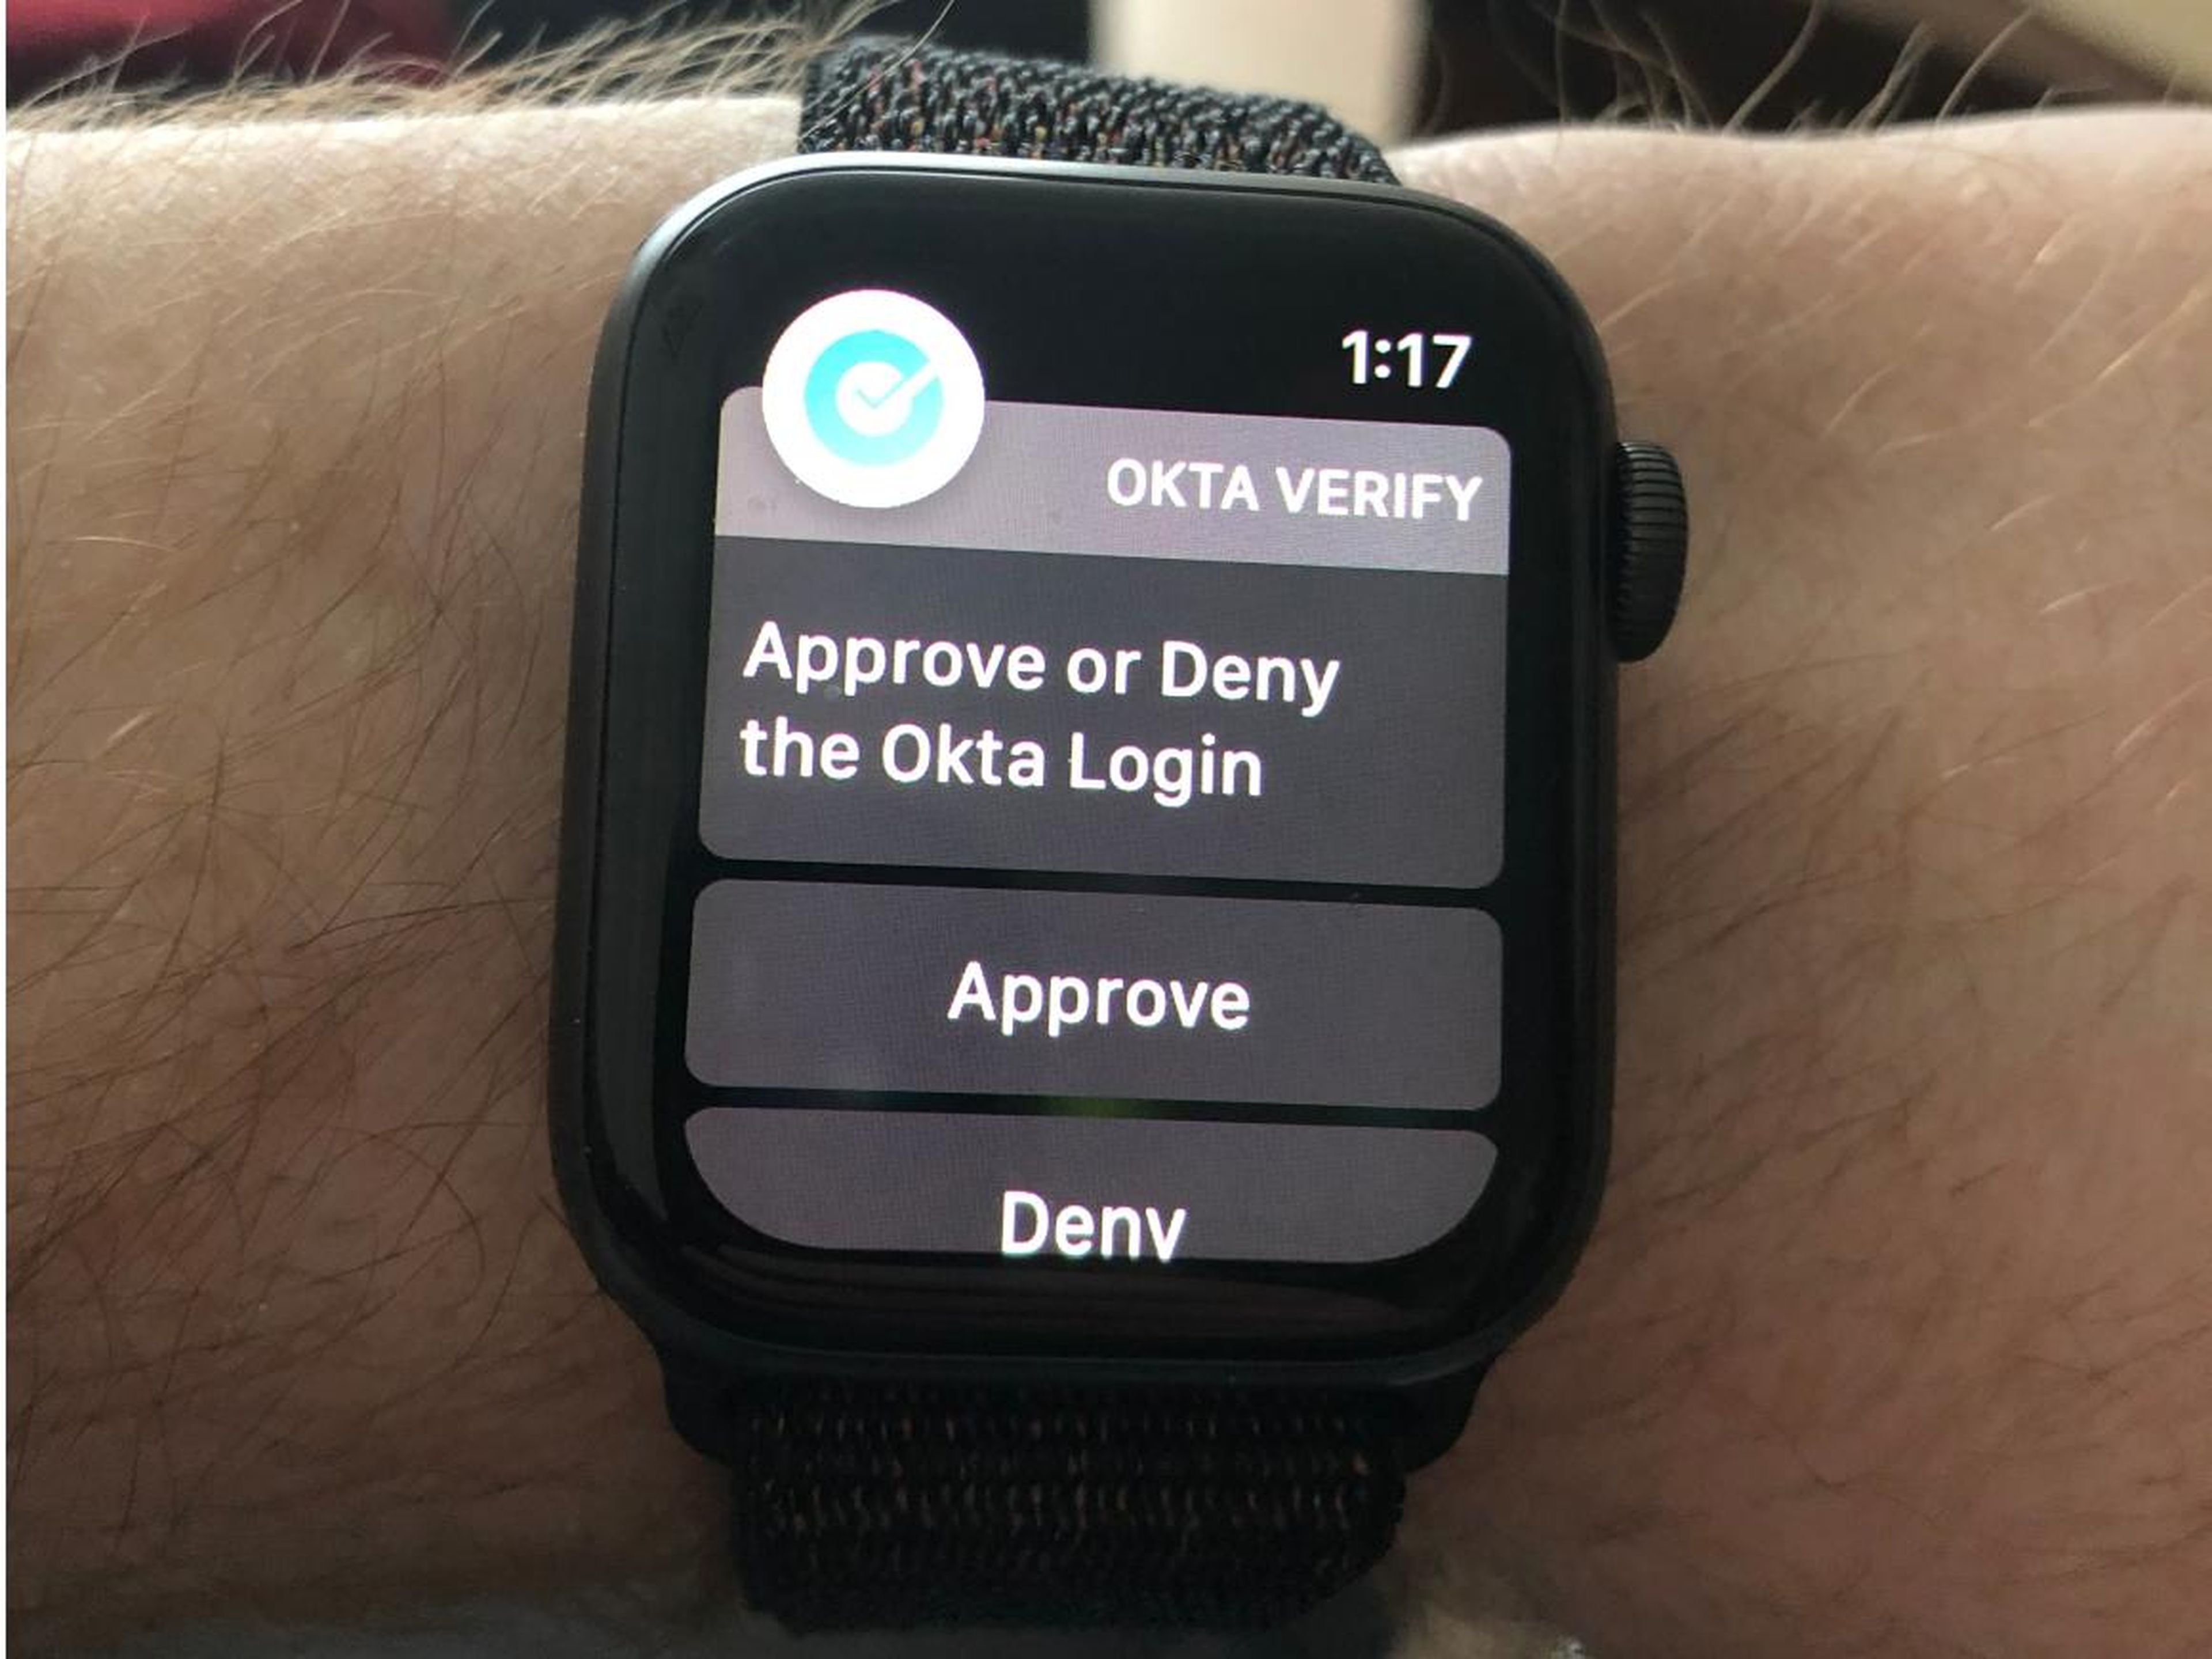 14. Your Apple Watch can "approve" apps that need to verify your identity.